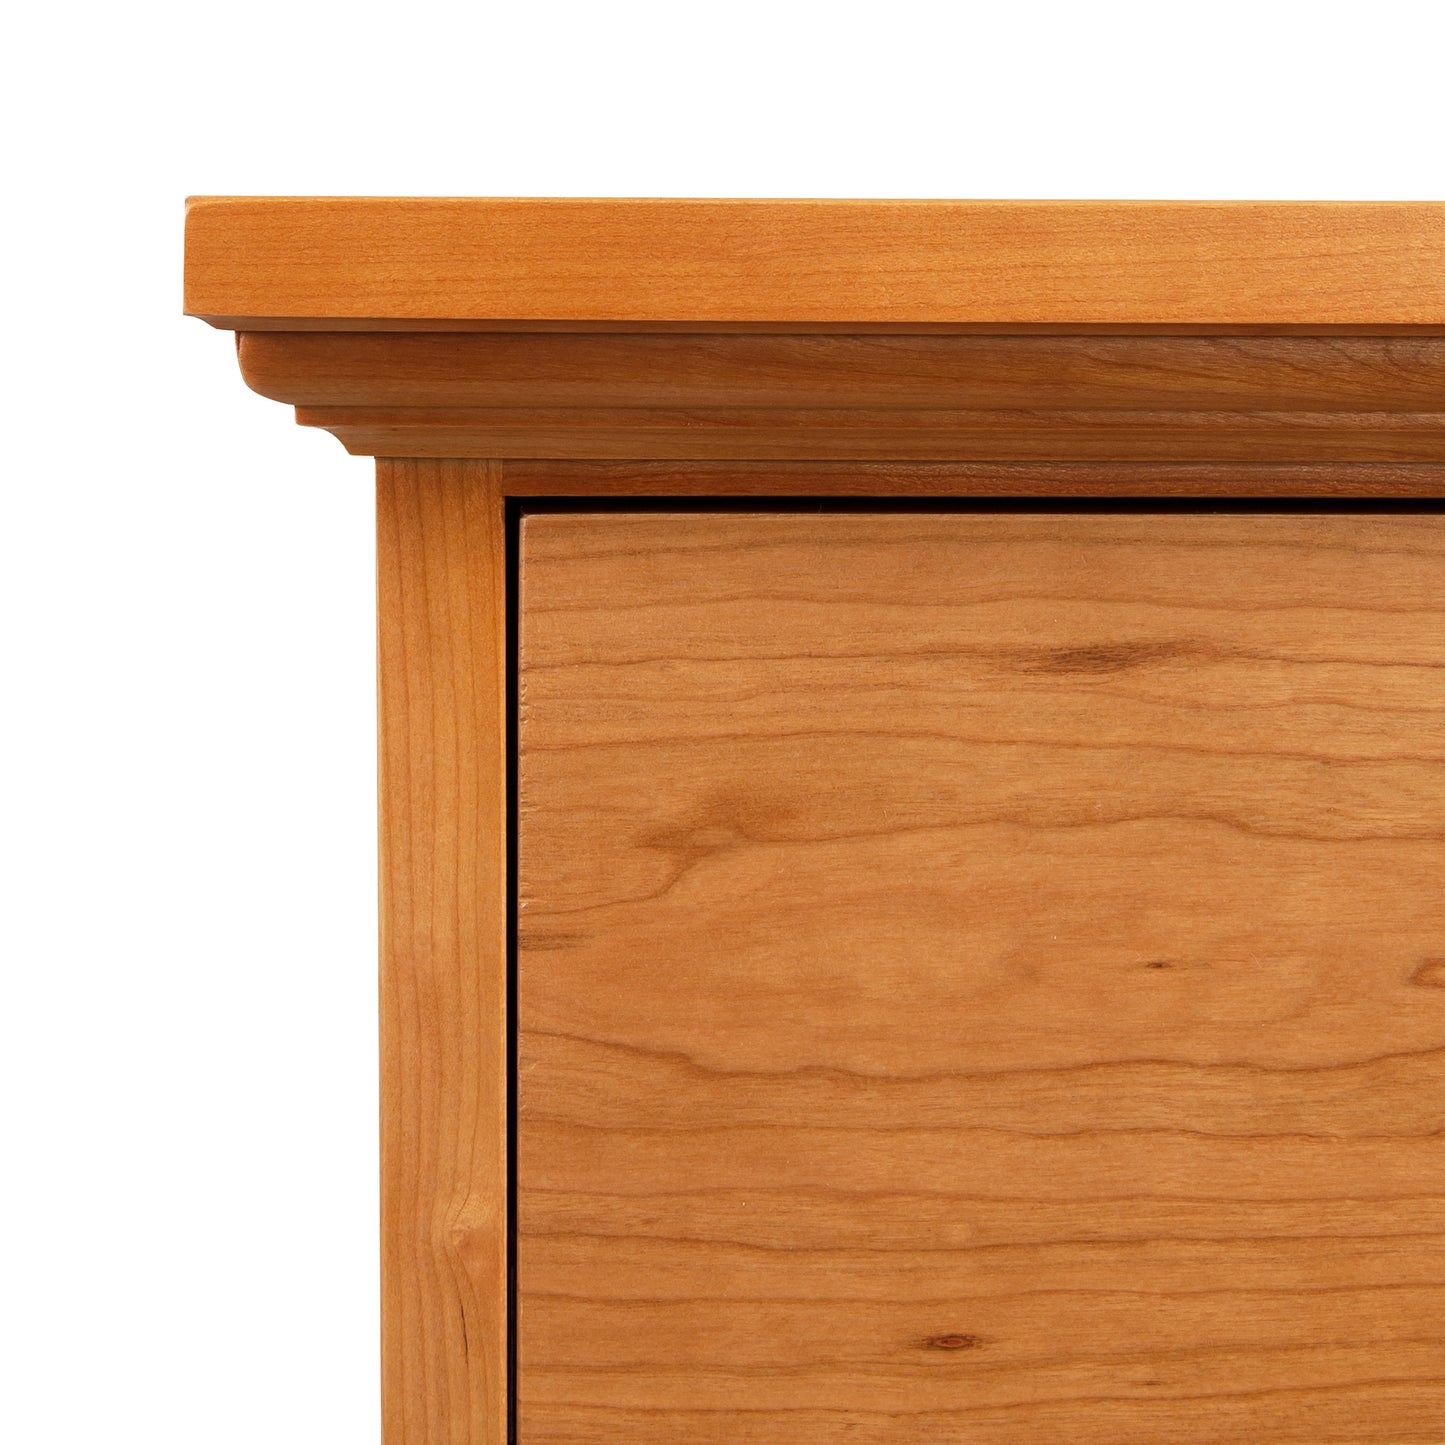 A close up of a Lyndon Furniture New England Shaker 3-Drawer Nightstand with Arched Base.